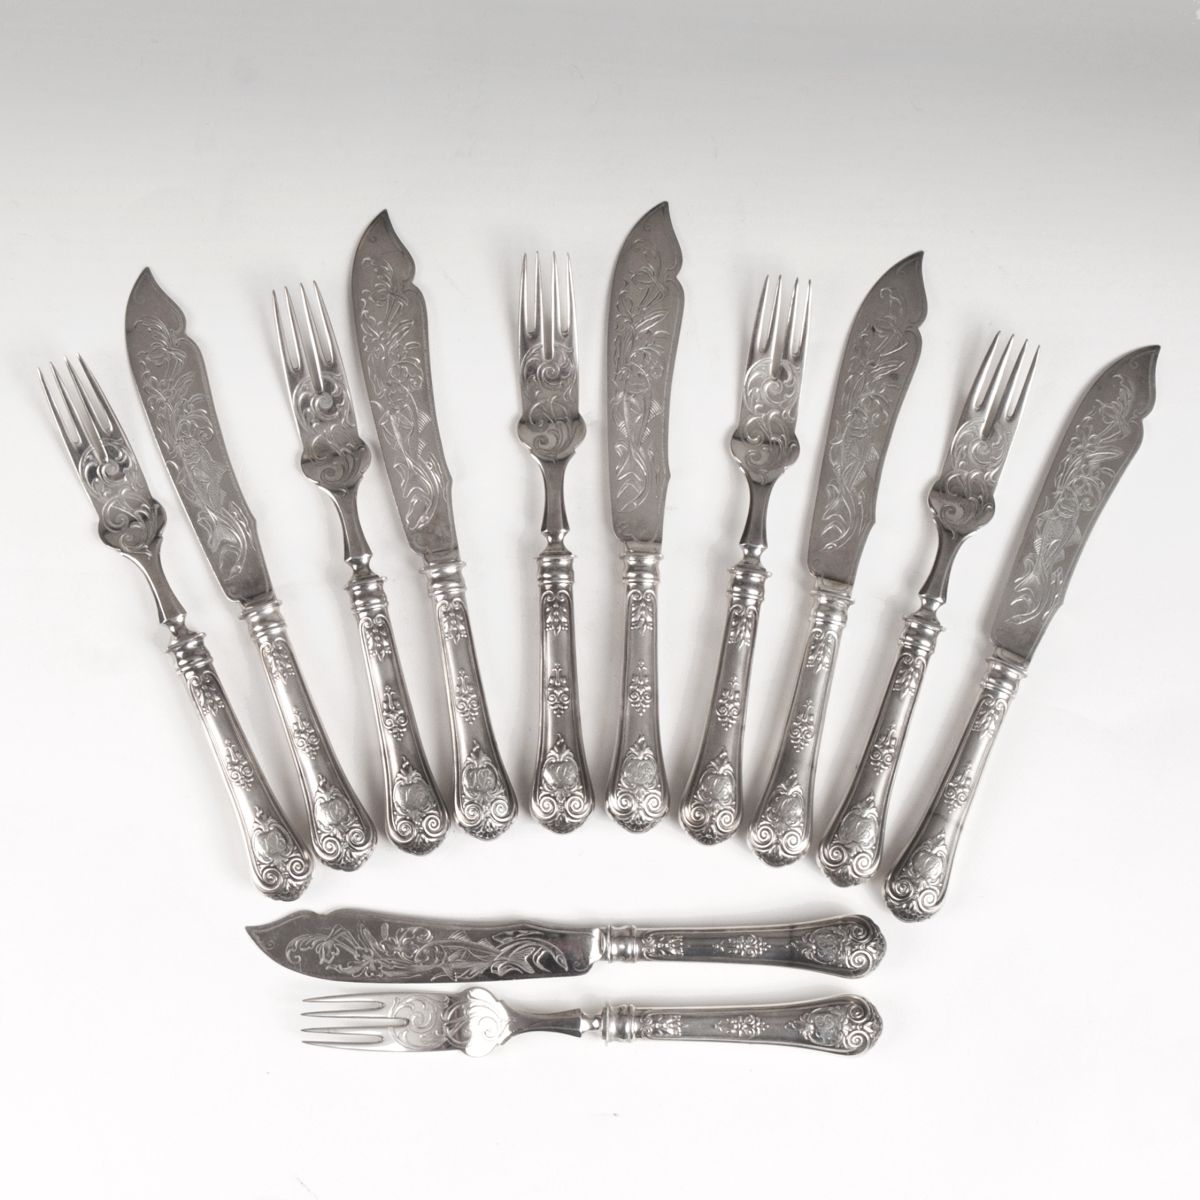 A richly decorated fish cutlery